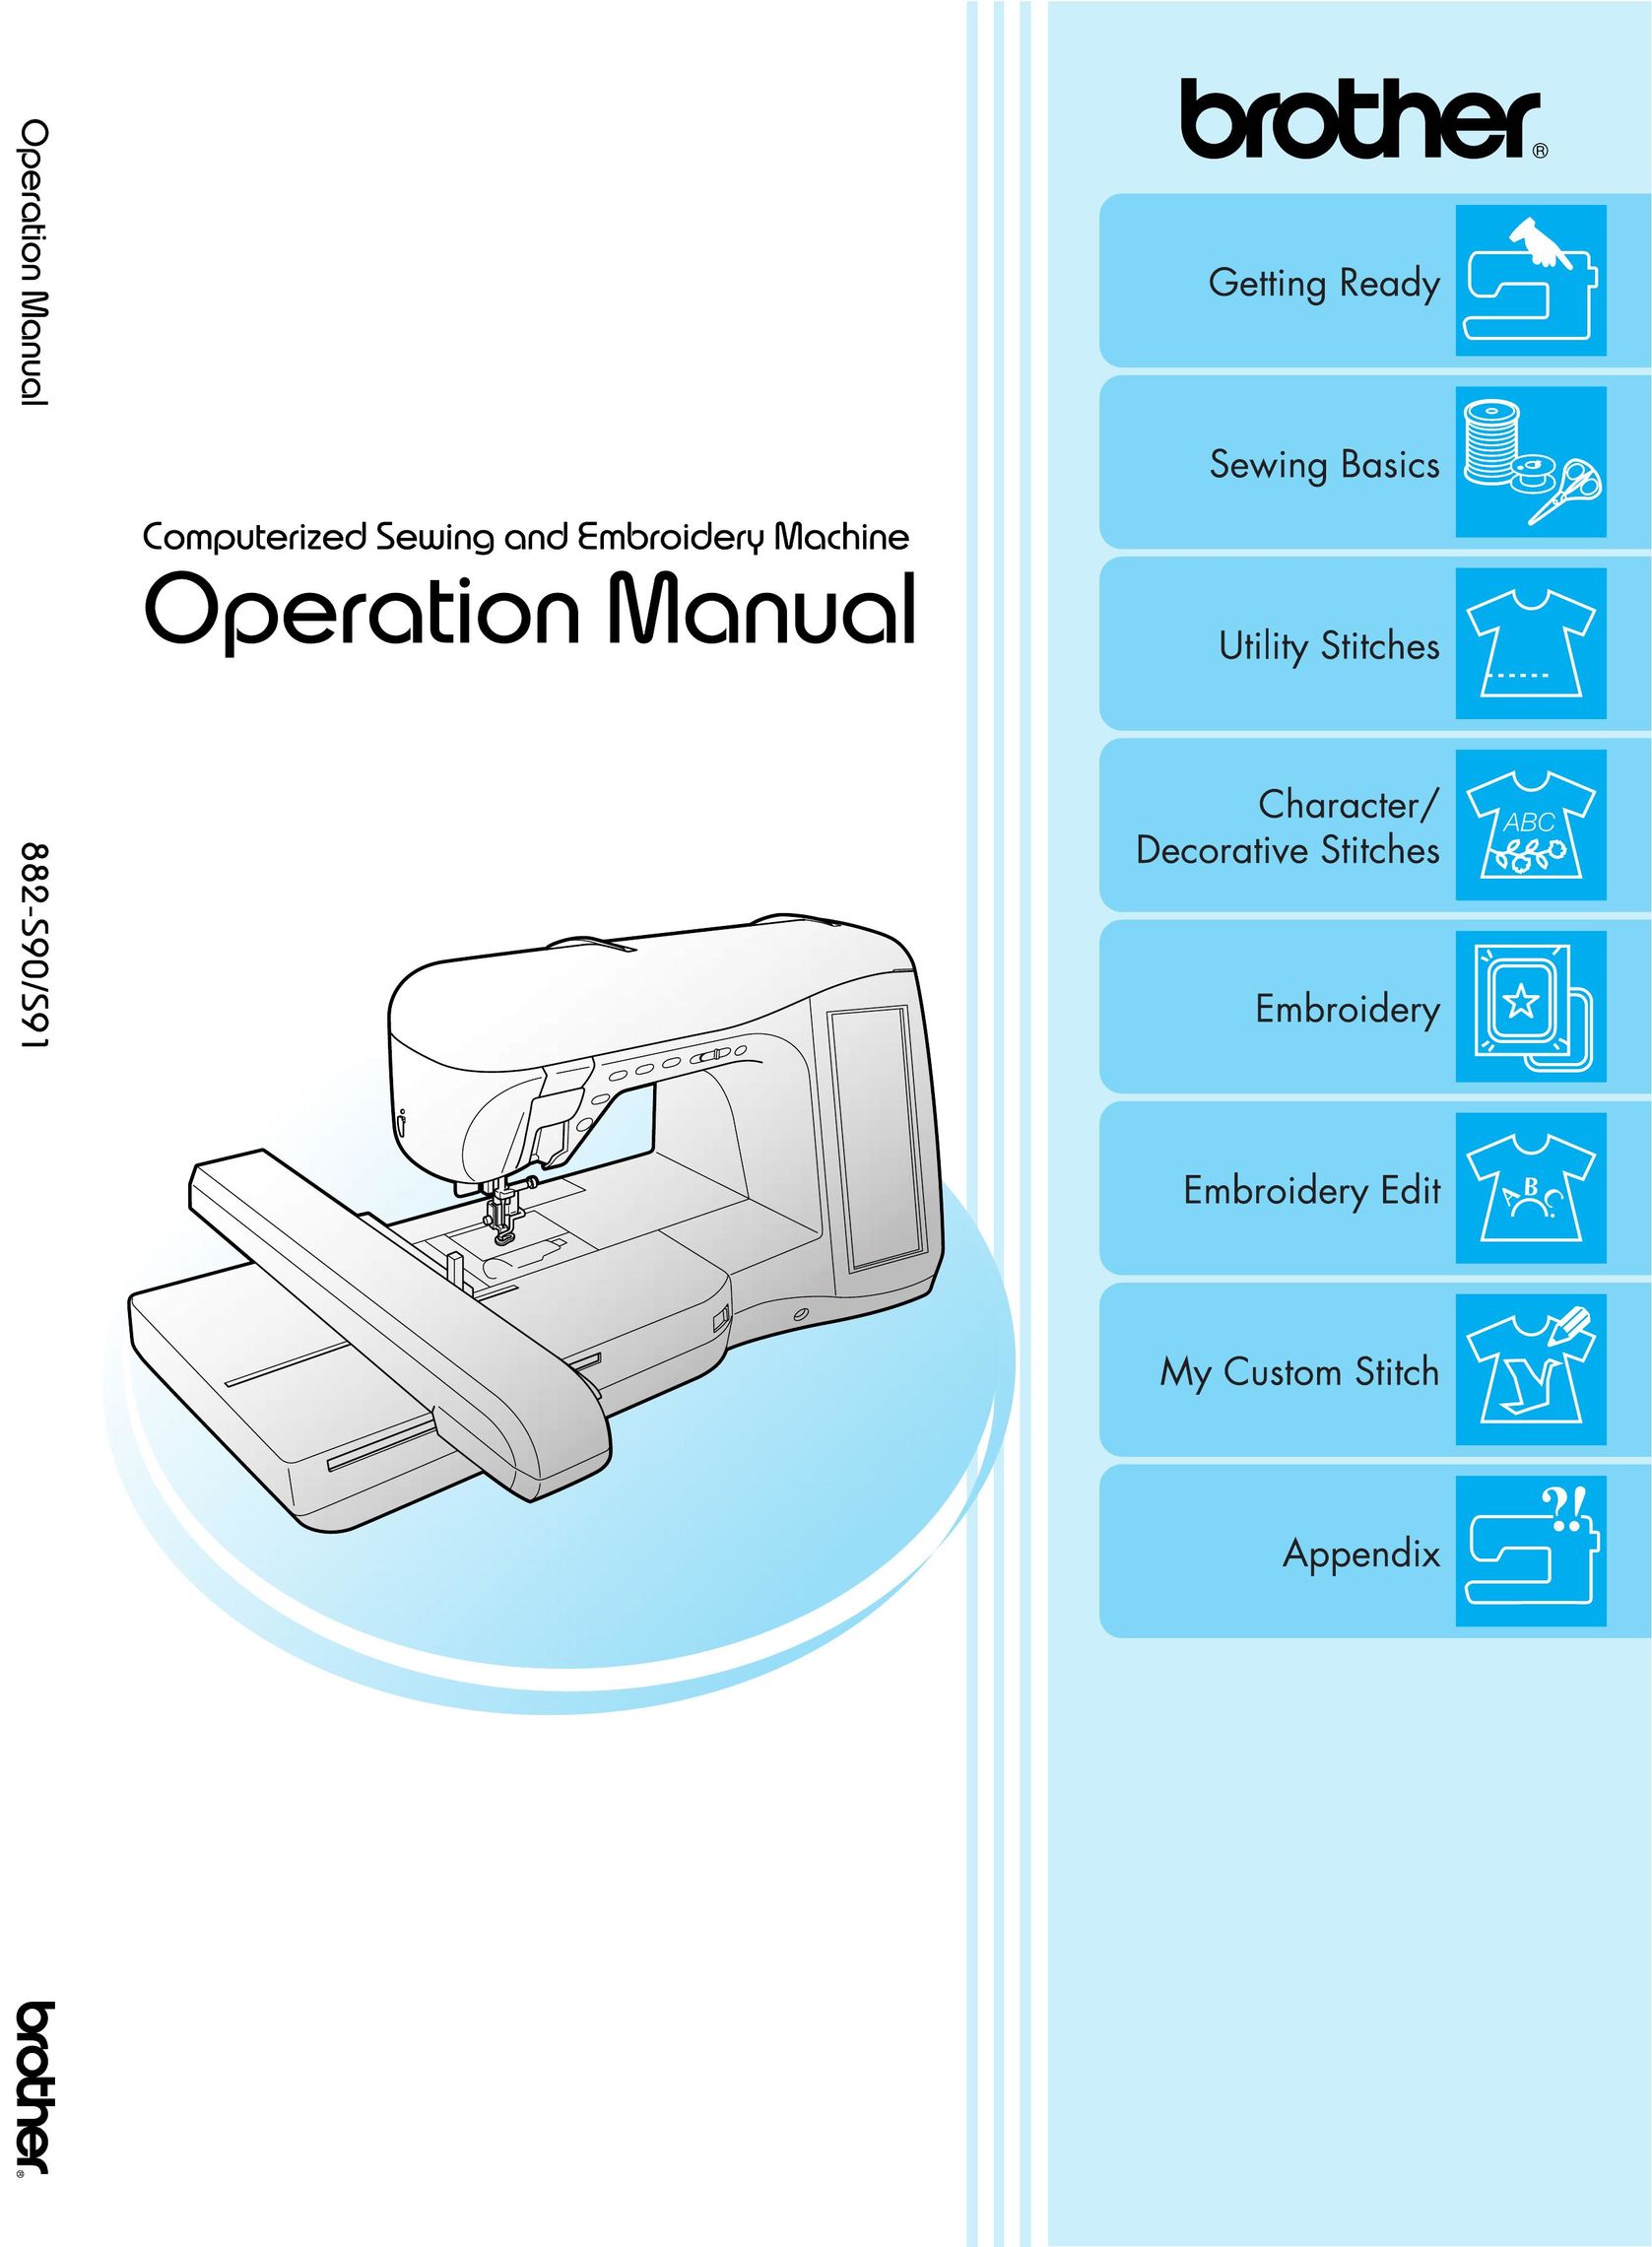 Brother 882-S90/S91 Sewing Machine User Manual